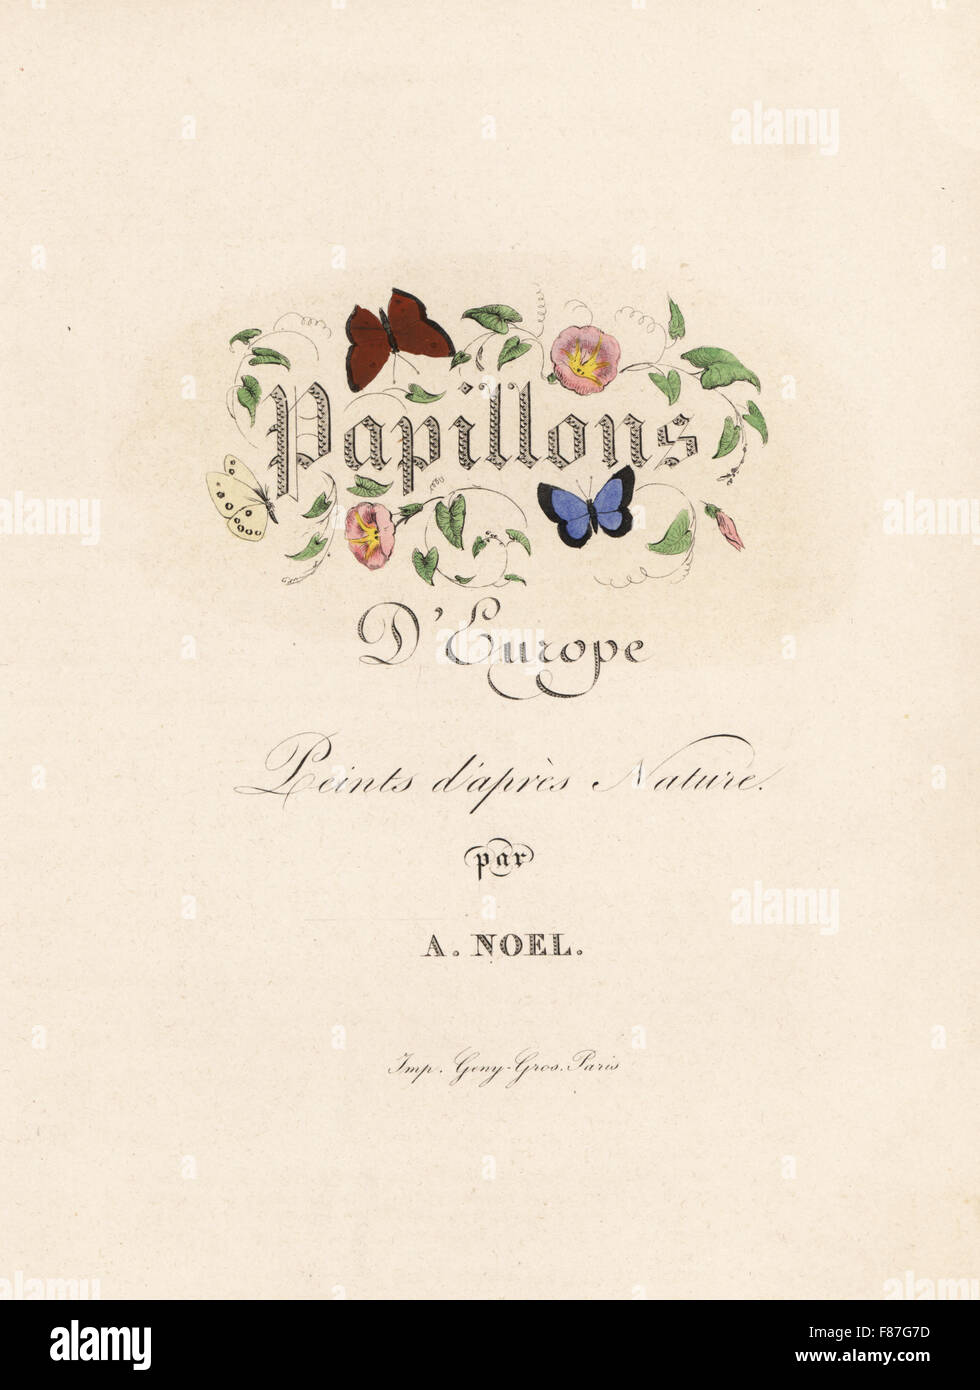 Title page with decorative calligraphy among flowers and butterflies. Handcoloured steel engraving by the Pauquet brothers after an illustration by Alexis Nicolas Noel from Hippolyte Lucas' Natural History of European Butterflies, Histoire Naturelle des Lepidopteres d'Europe, 1864. Stock Photo